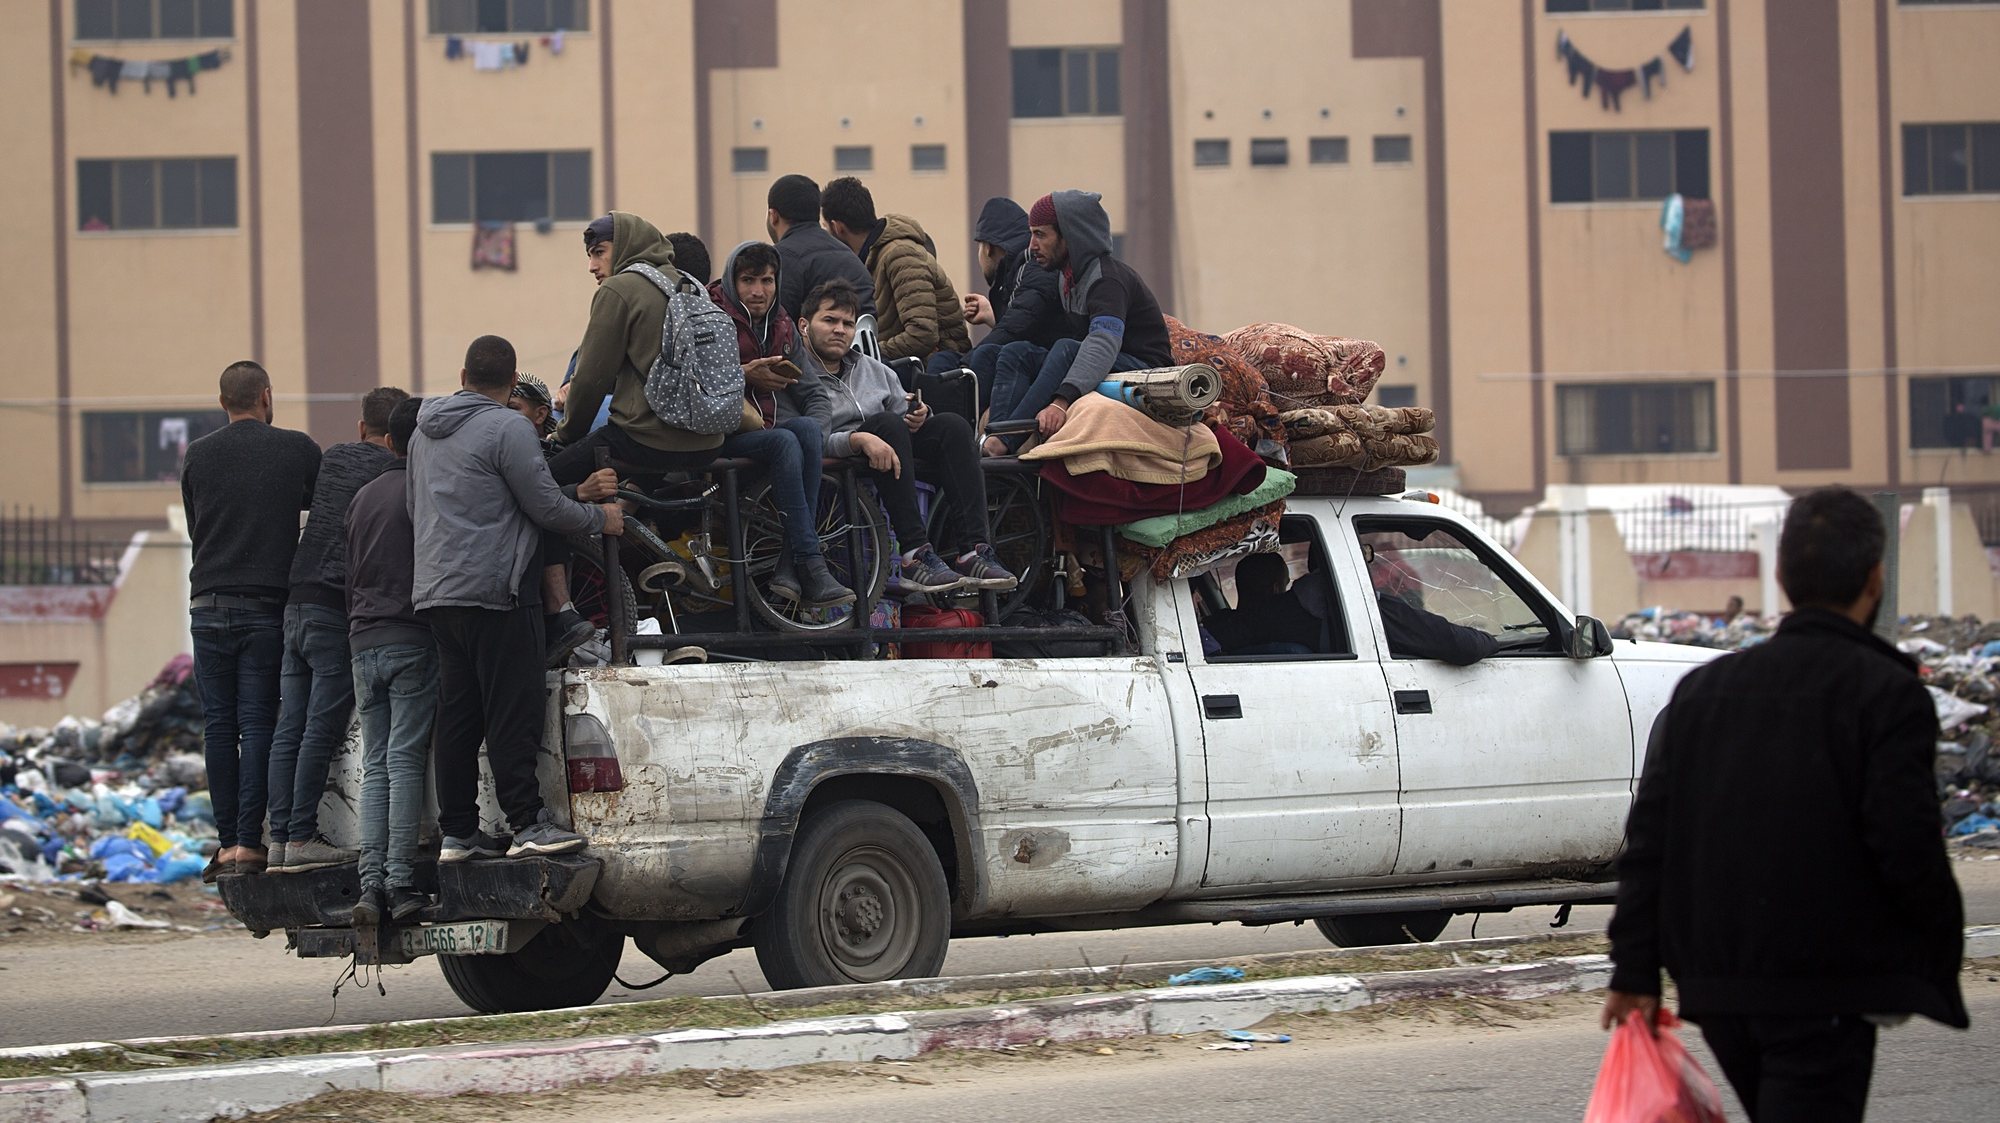 epa11045520 Displaced Palestinians from the Nuseirat, Bureij and parts of the Khan Yunis refugee camps, sit and stand next to their belongings aboard a vehicle as they make their way to the city of Rafah after an Israeli warning of increasing military operations in the Gaza Strip camps, 27 December 2023. Since 07 October, up to 1.9 million people, or more than 85 percent of the population, have been displaced throughout the Gaza Strip, some more than once, according to the United Nations Relief and Works Agency for Palestine Refugees in the Near East (UNRWA), which added that most civilians in Gaza are in &#039;desperate need of humanitarian assistance and protection&#039;.  EPA/HAITHAM IMAD